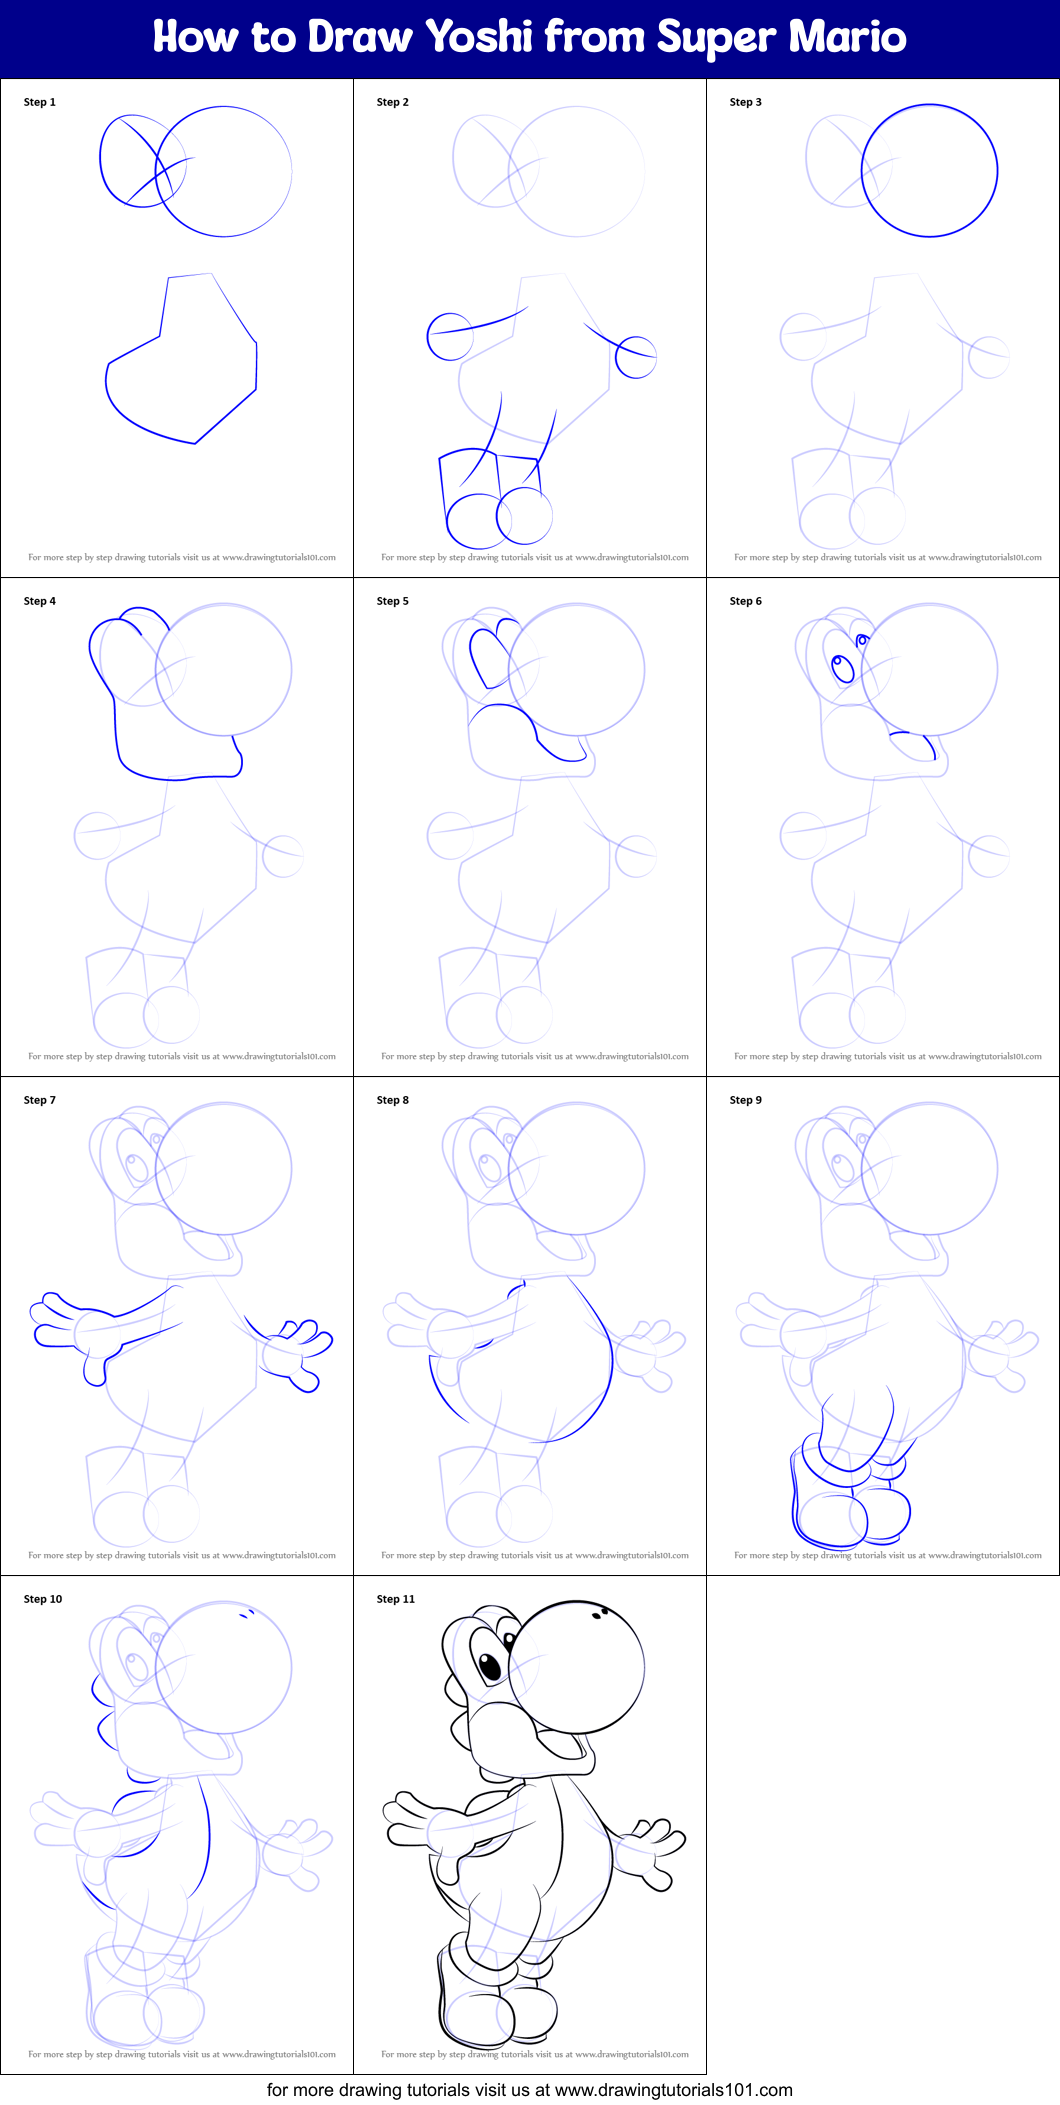 How To Draw Yoshi From Super Mario Super Mario Step By Step